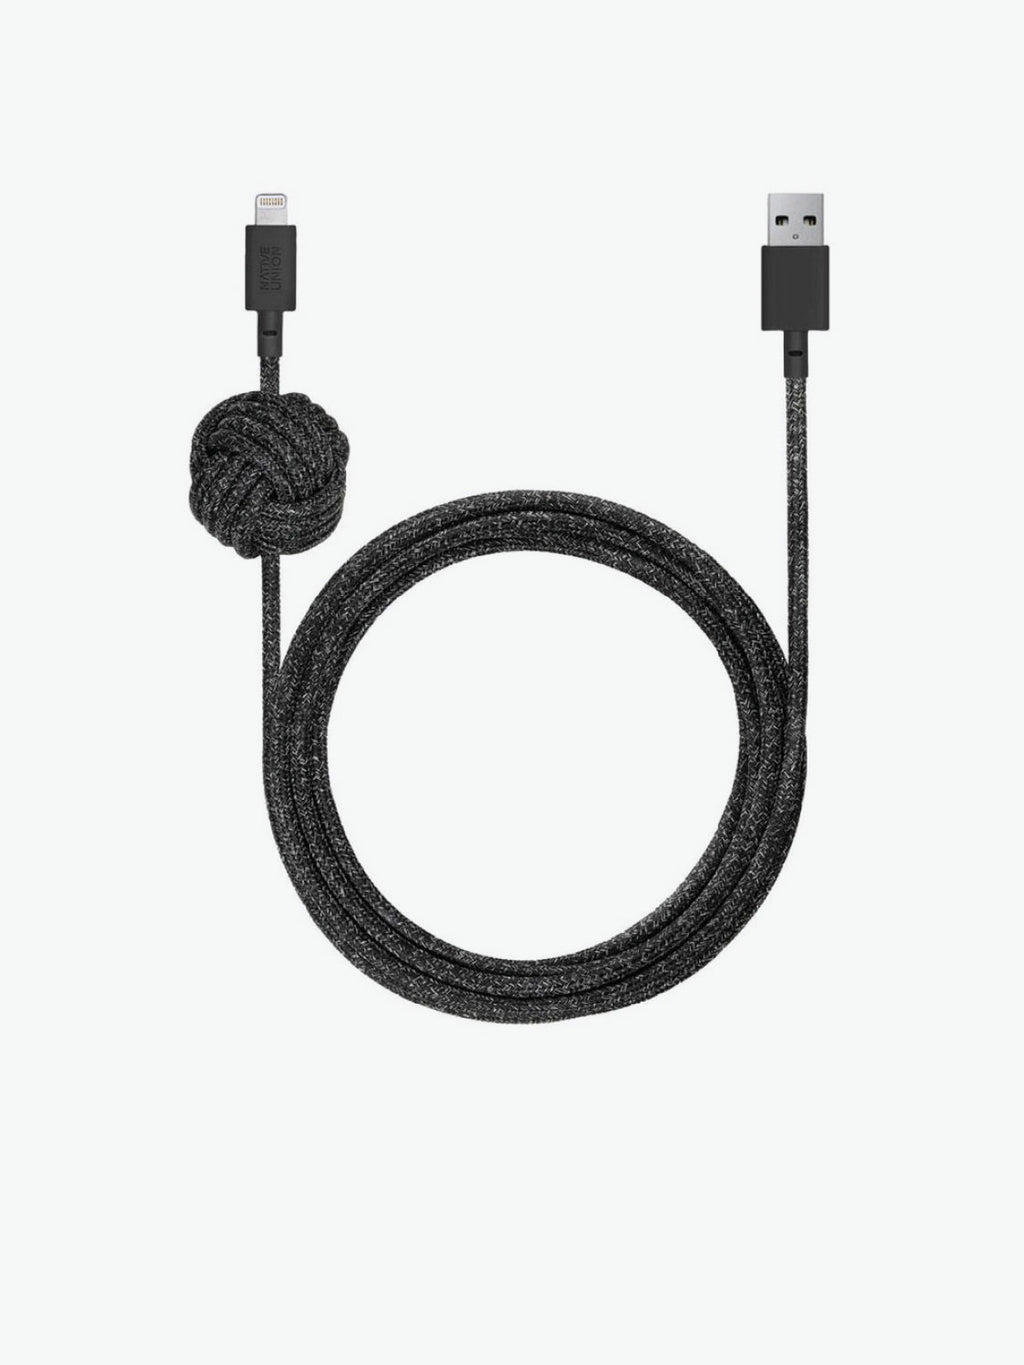 Native Union Night Cable Apple Lightning Cosmos Black XL | A